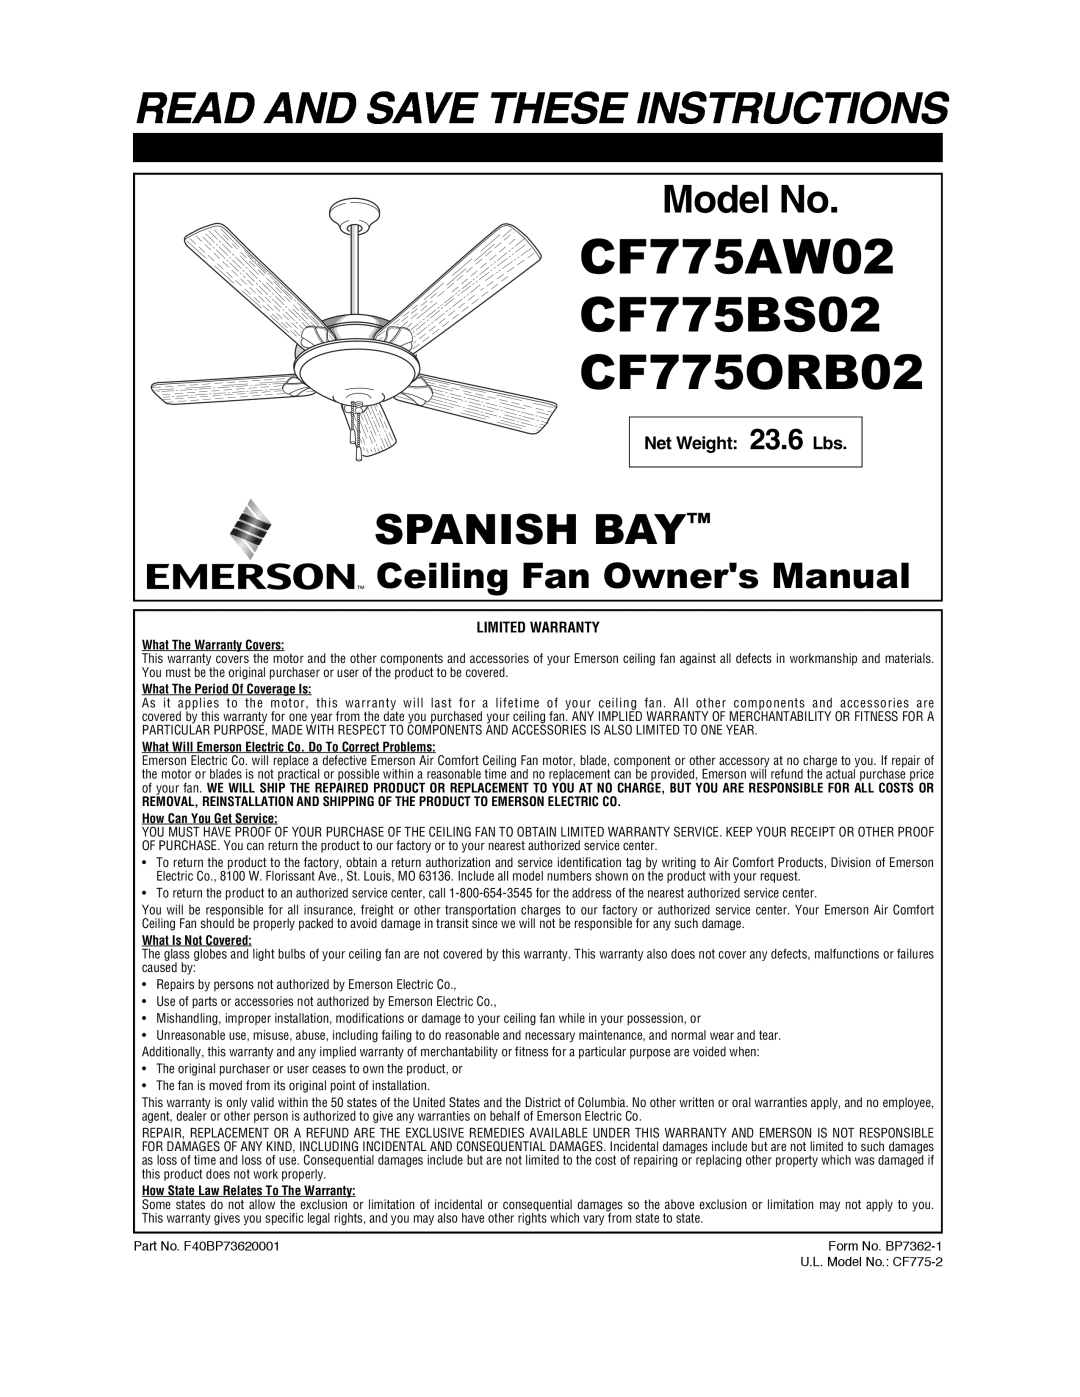 Emerson CF775ORB02 warranty CF775AW02, CF775BS02, Read And Save These Instructions, Spanish Bay, Model No 